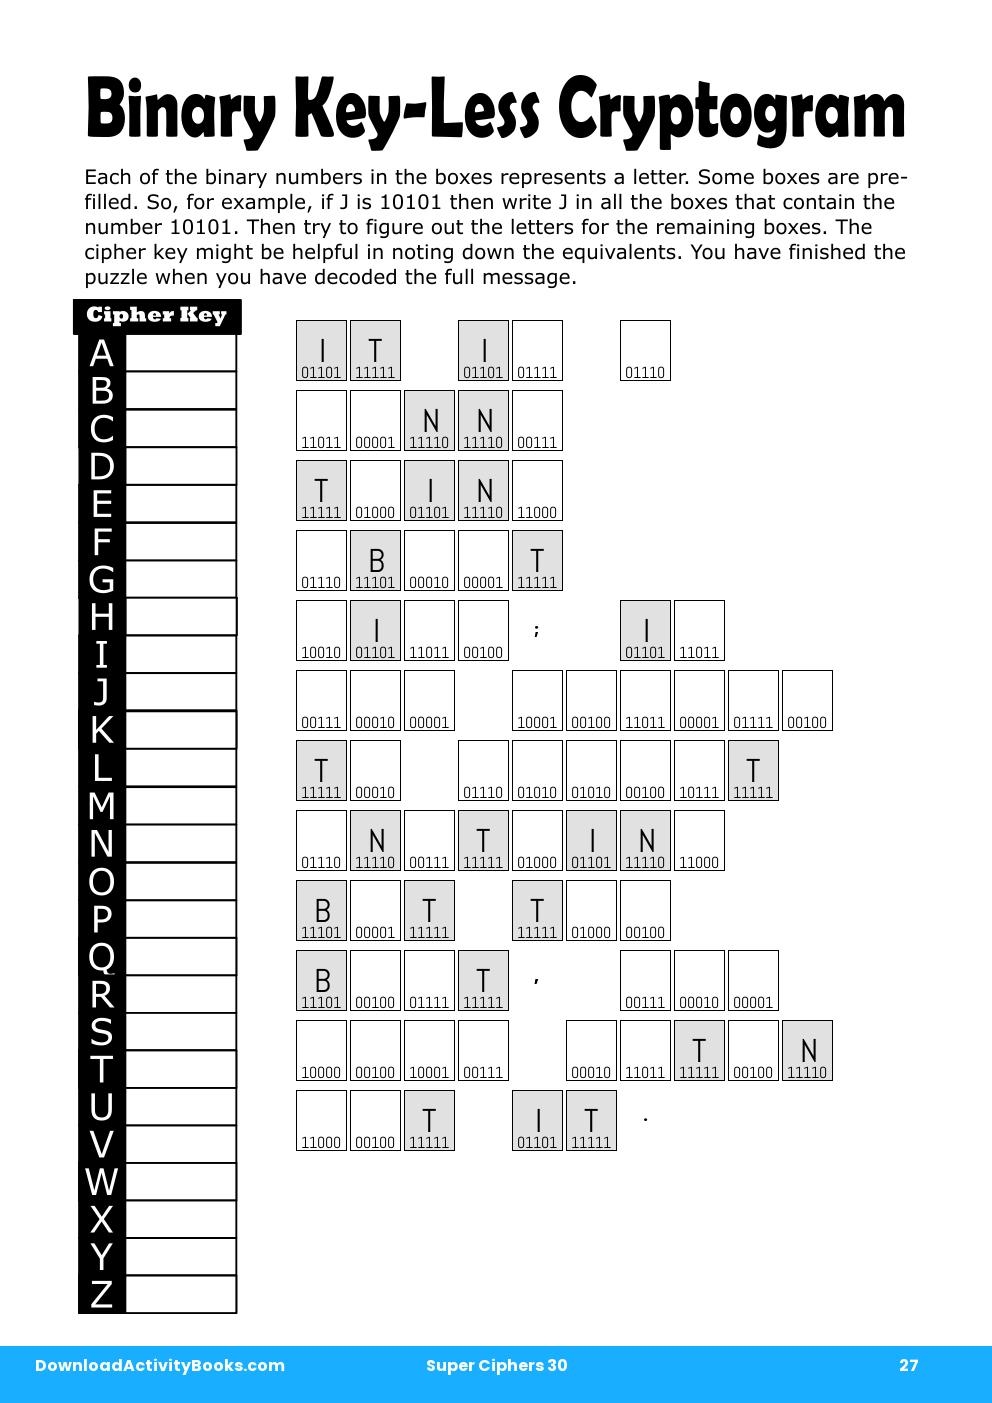 Binary Key-Less Cryptogram in Super Ciphers 30